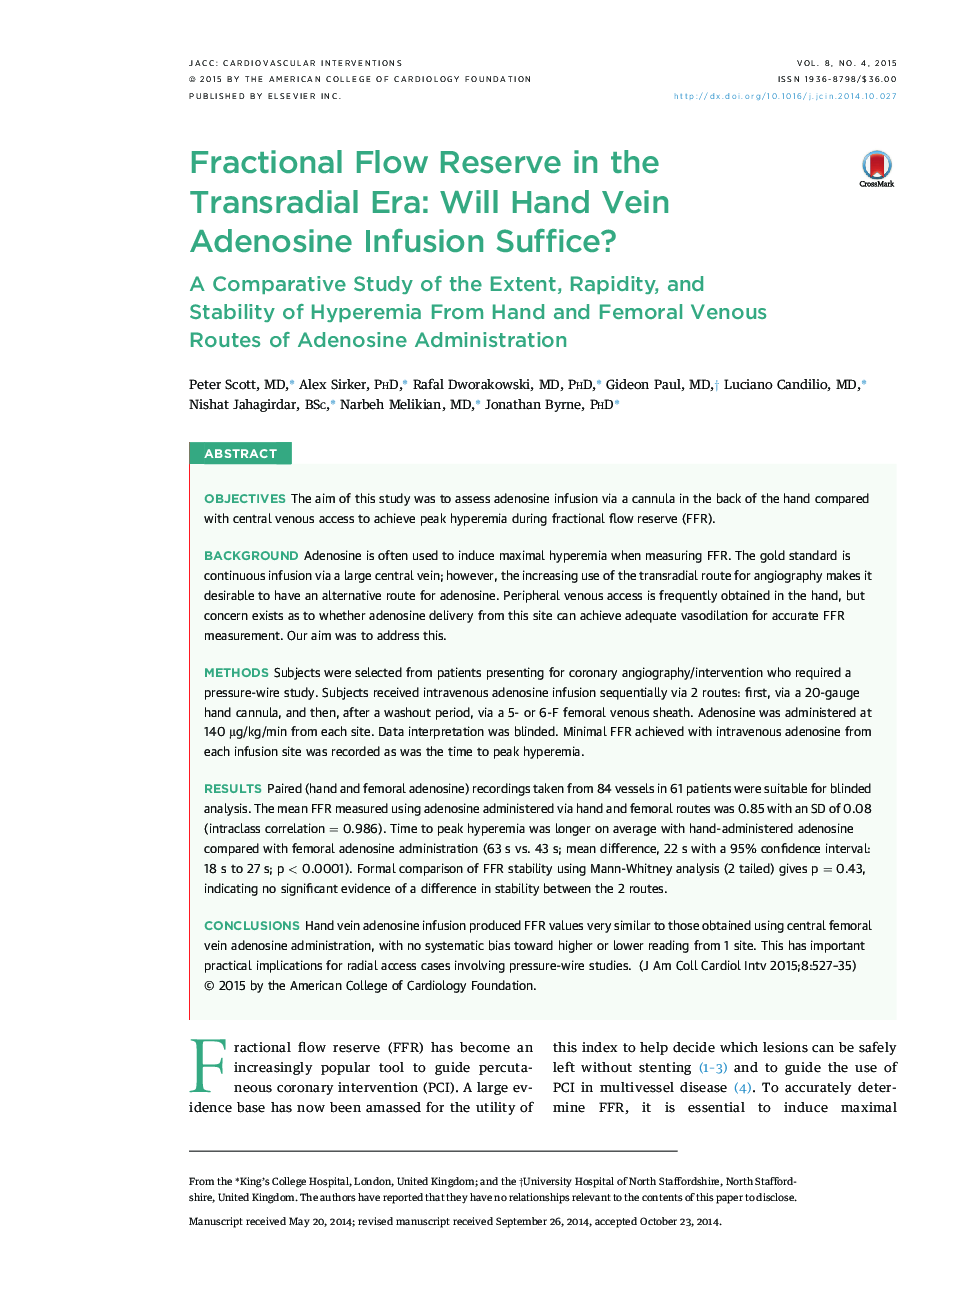 Fractional Flow Reserve in the Transradial Era: Will Hand Vein Adenosine Infusion Suffice? : A Comparative Study of the Extent, Rapidity, and Stability of Hyperemia From Hand and Femoral Venous Routes of Adenosine Administration